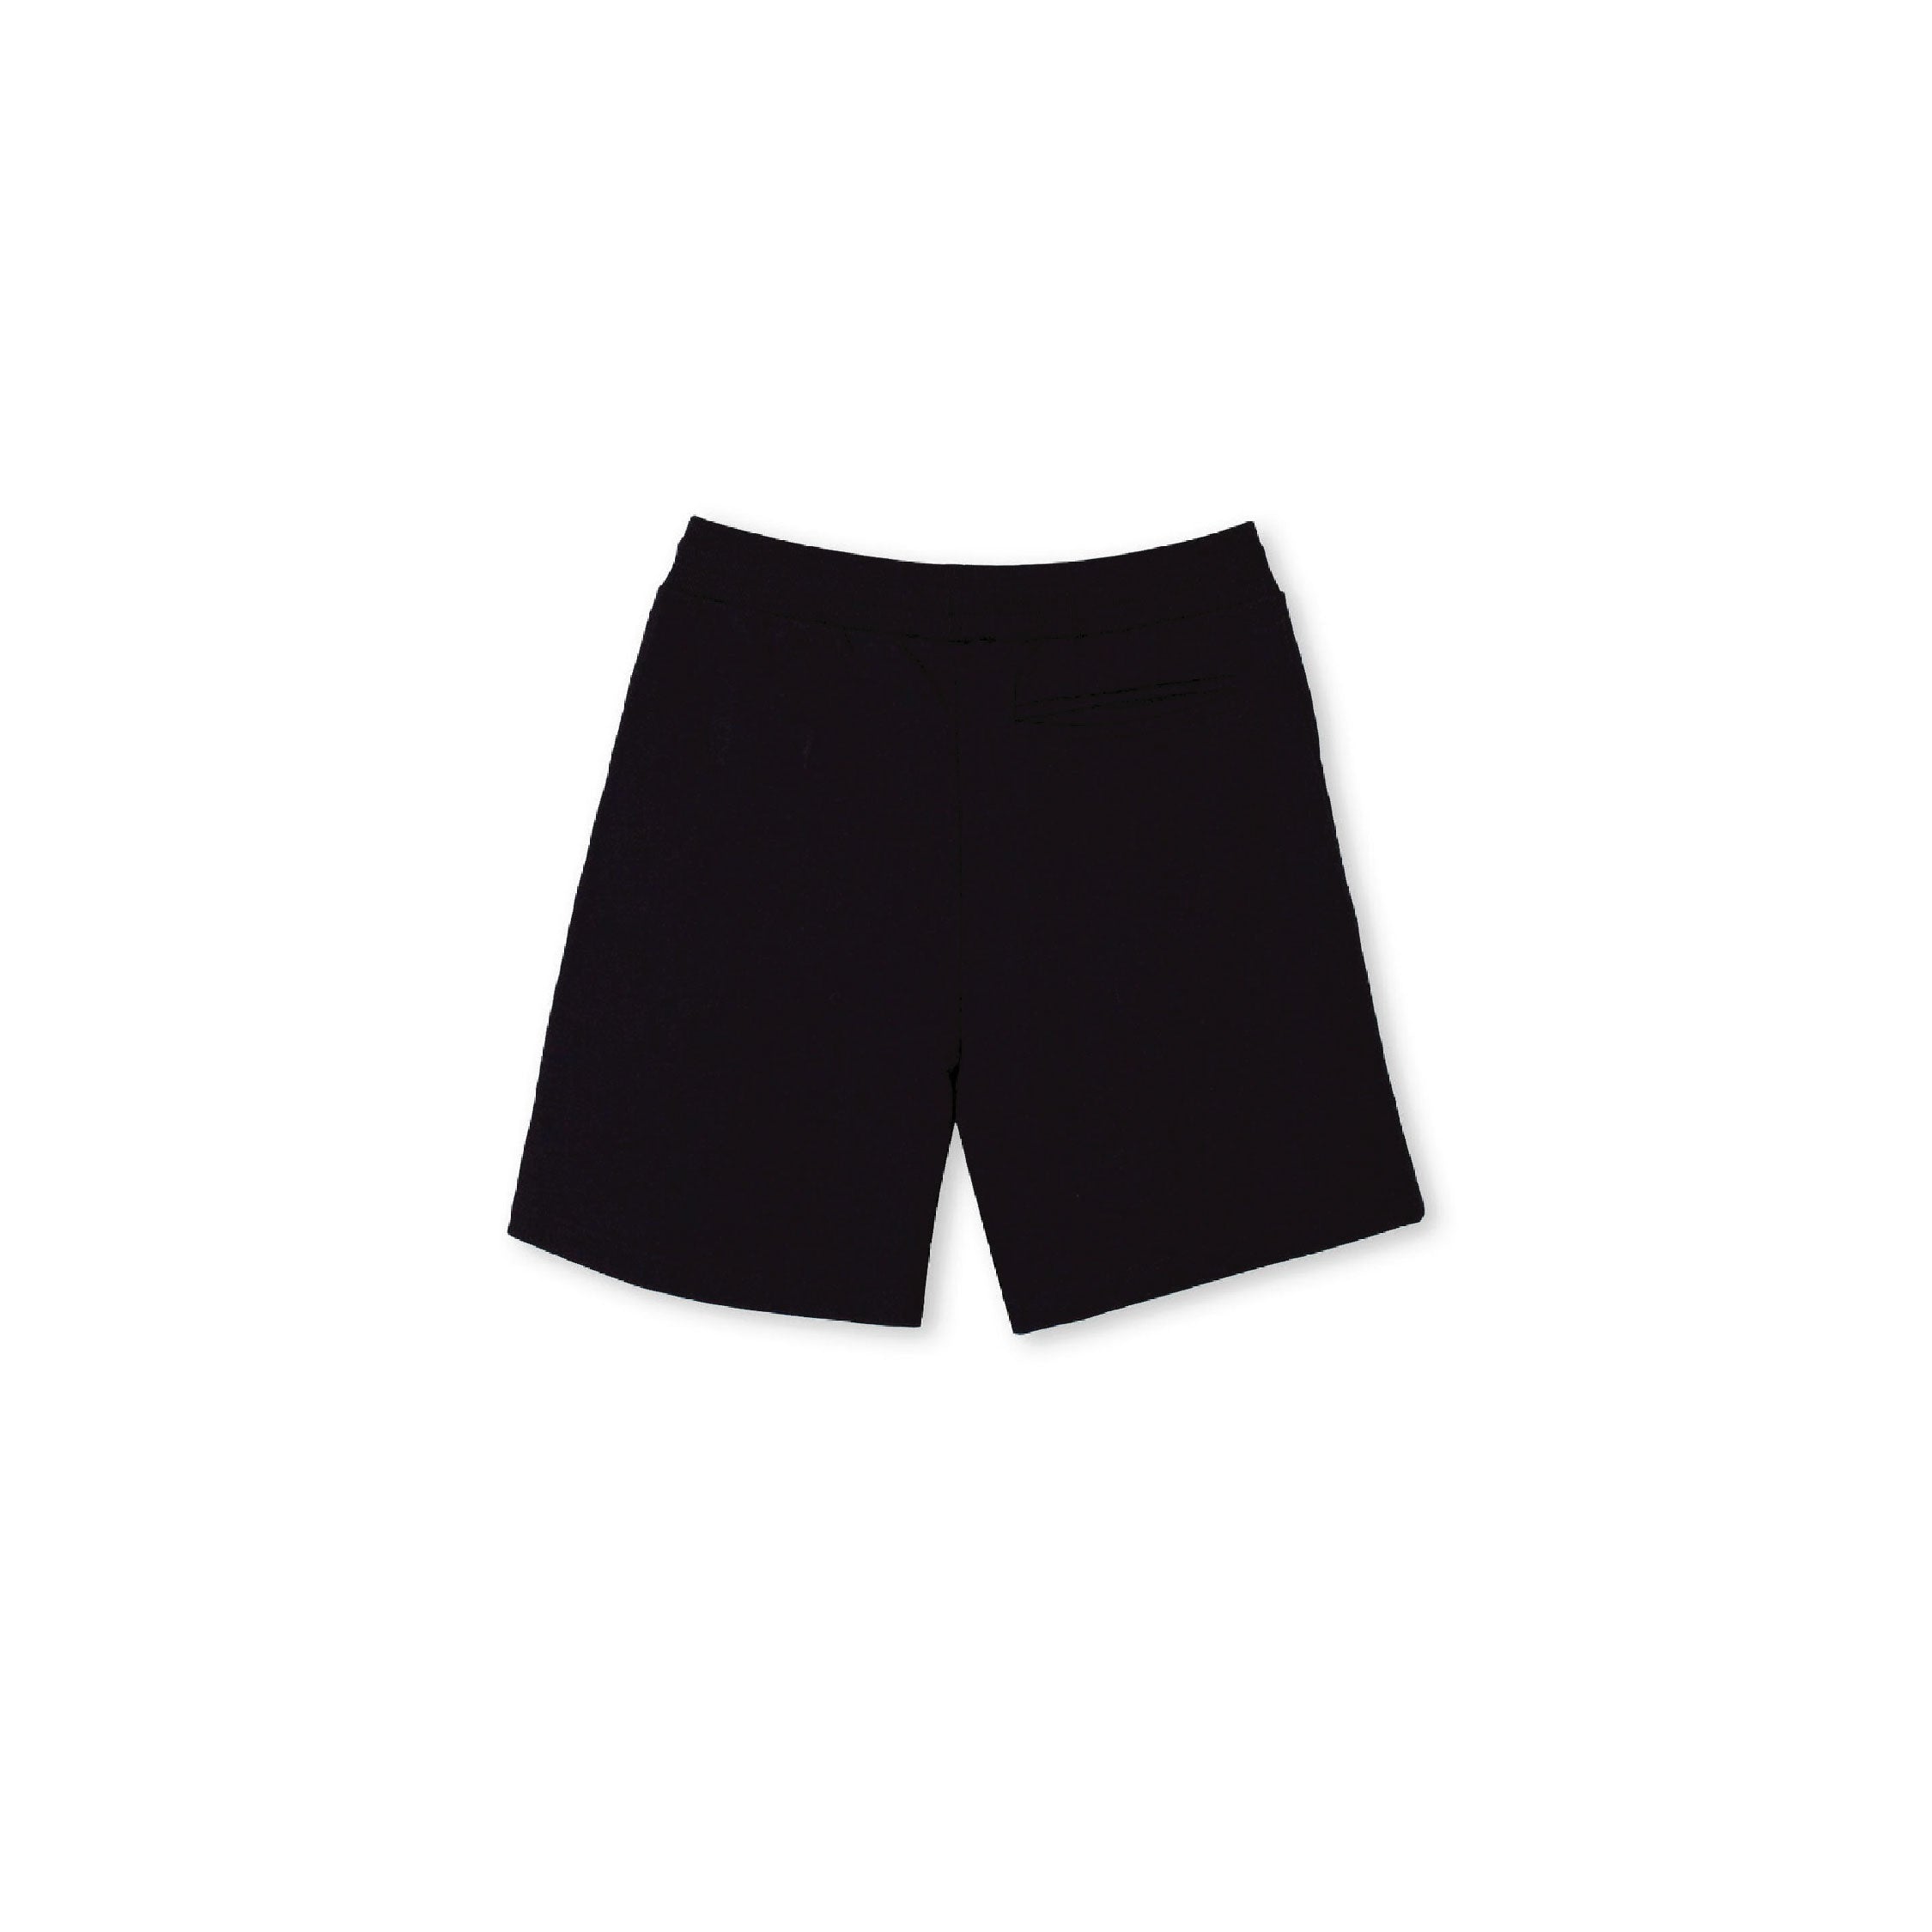 ESTATE OF MIND FRENCH TERRY SHORTS - BLACK